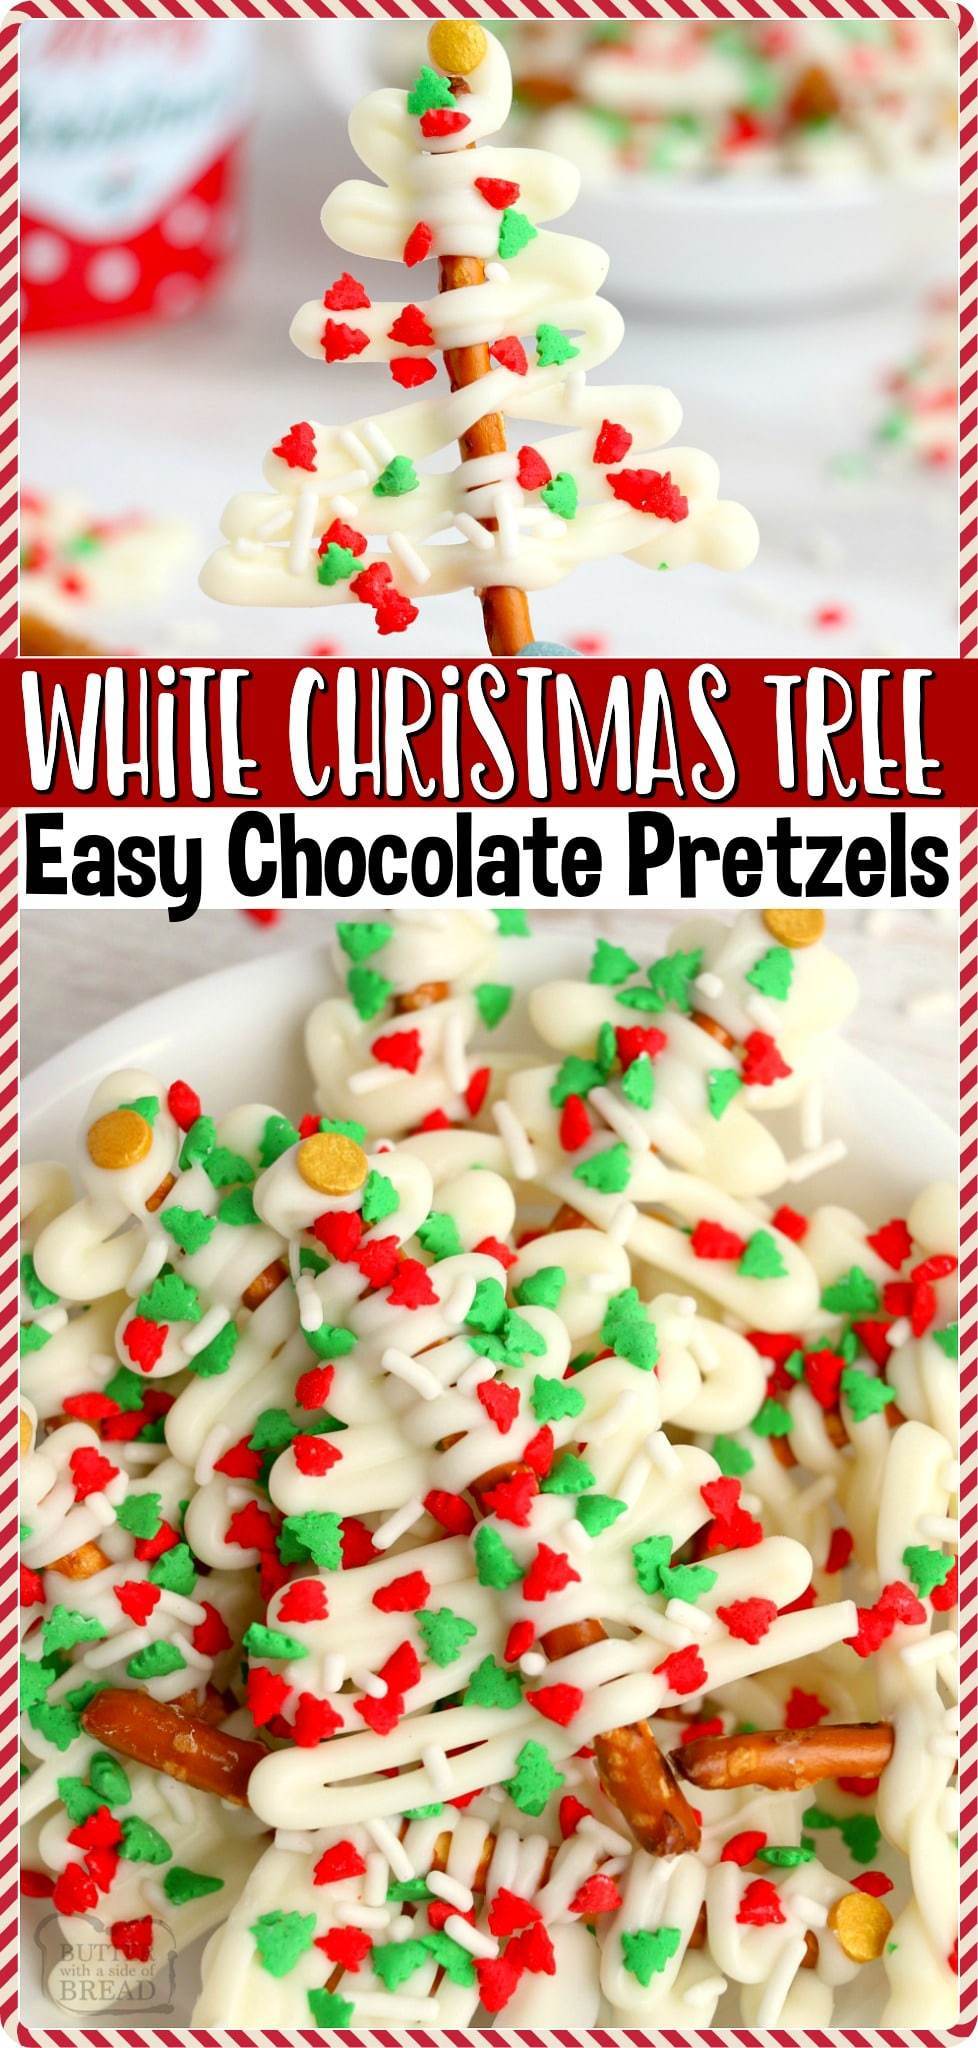 White Christmas Tree Pretzels made with 3 simple ingredients in minutes! Easy, festive white chocolate dessert for cookie trays and Christmas gifts!